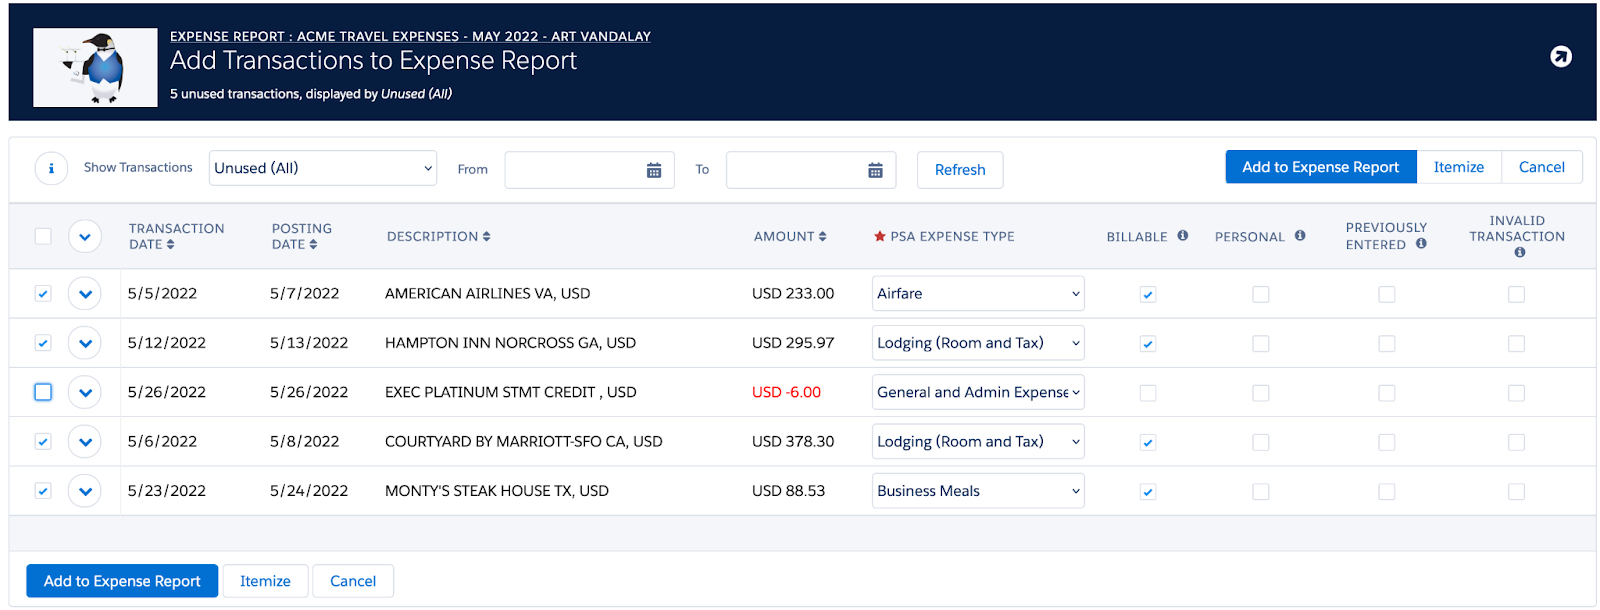 After selecting one or more transactions, users can add transactions to Expense Reports